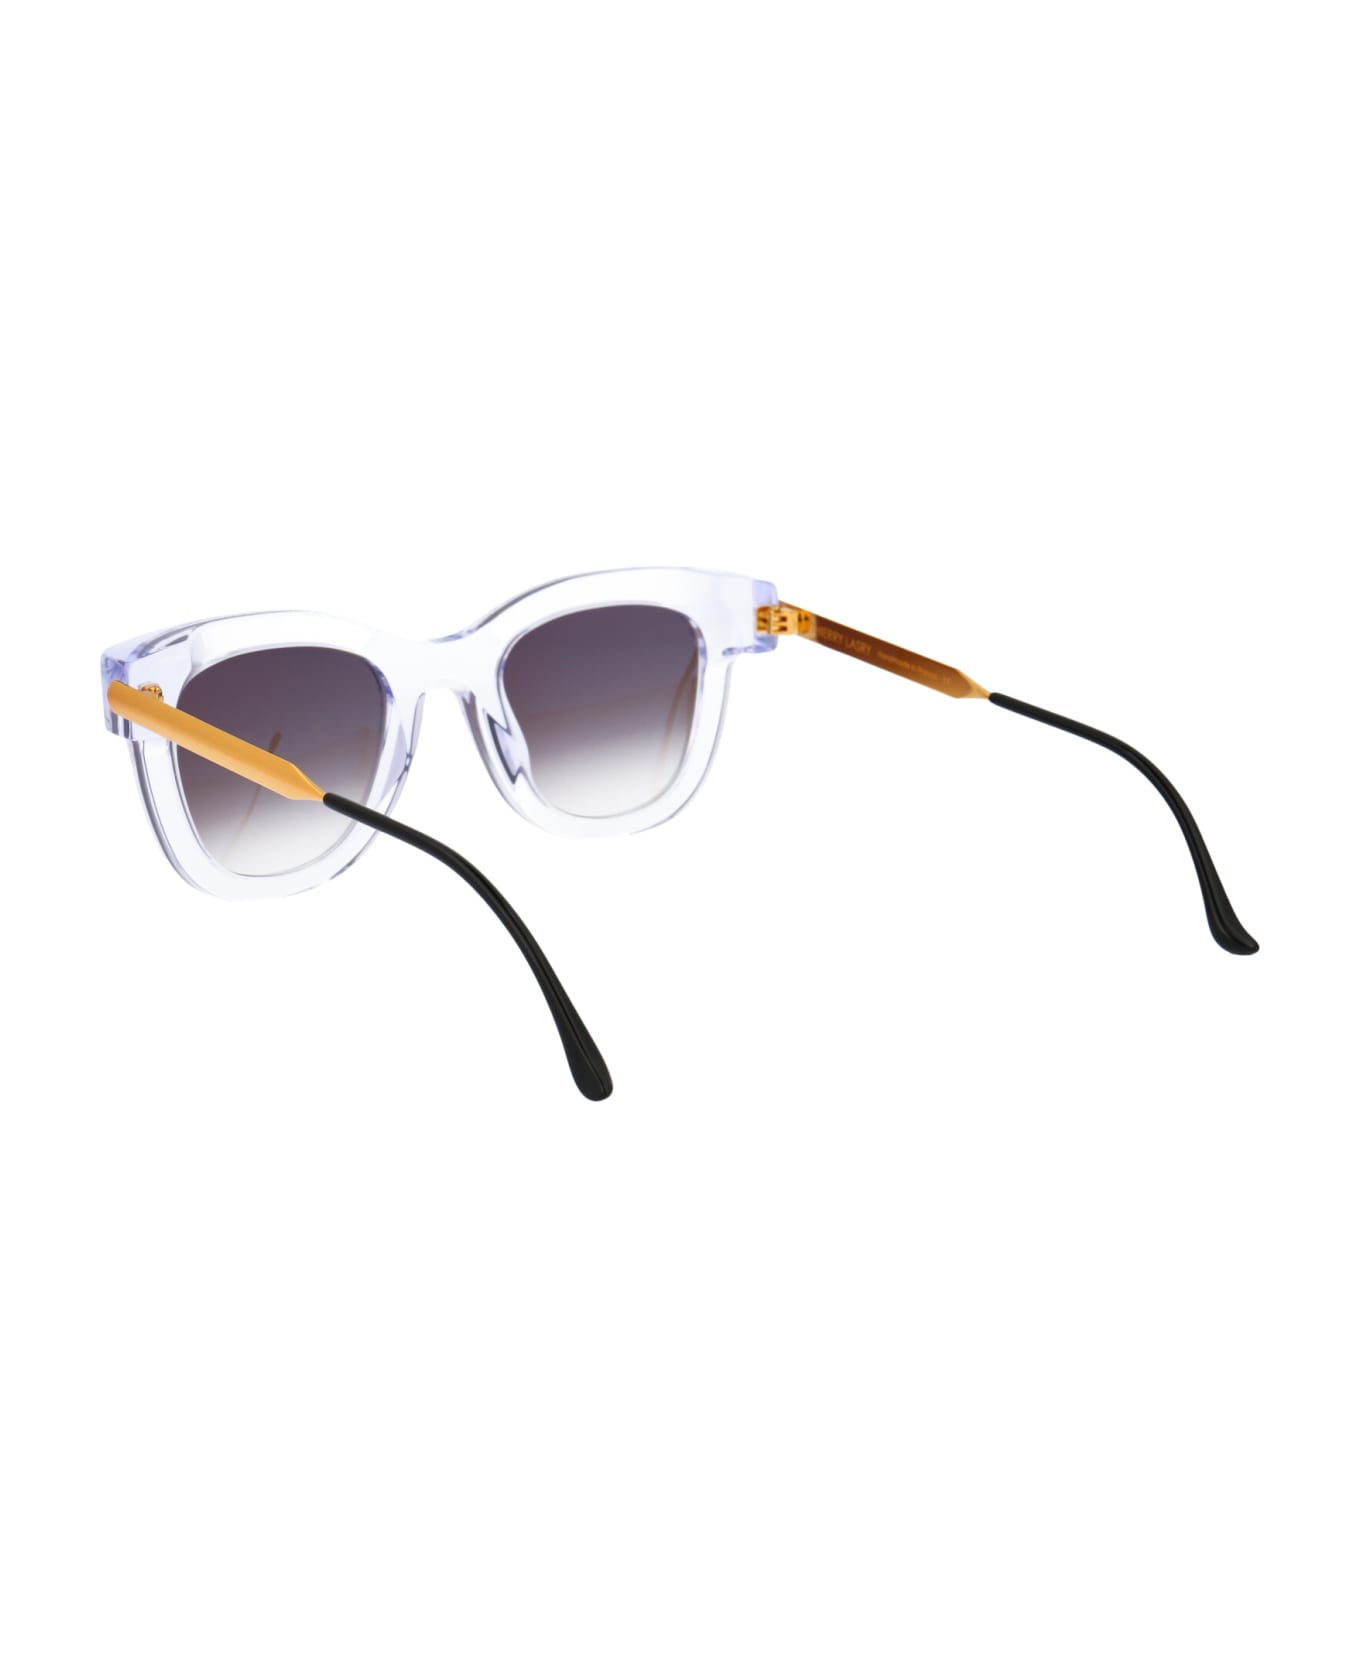 Thierry Lasry Sexxxy Sunglasses - 00 CRYSTAL